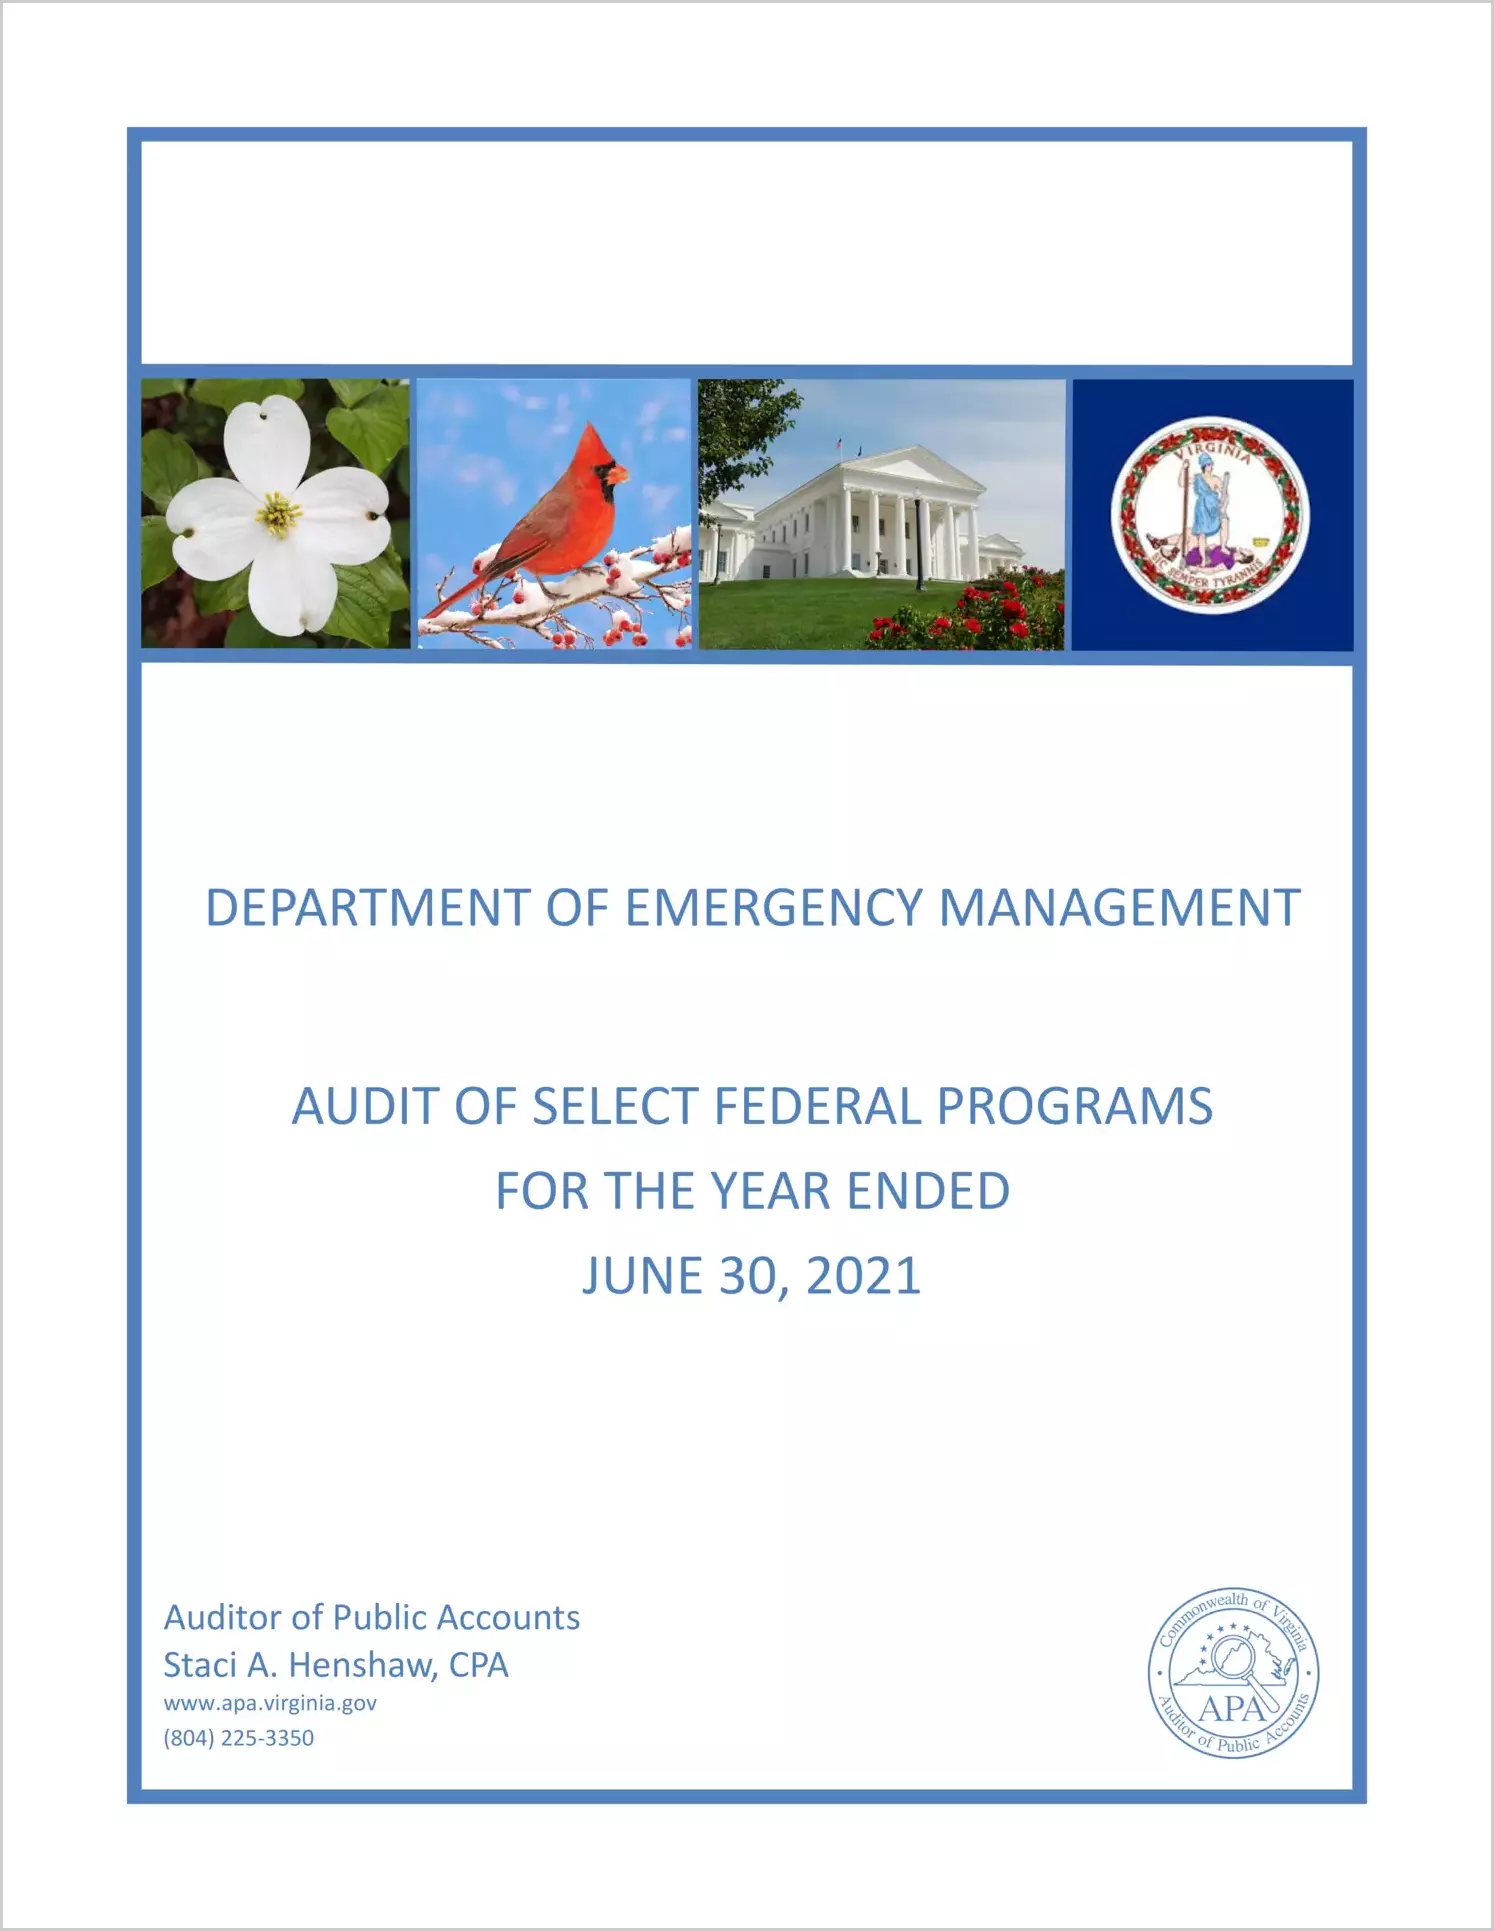 Department of Emergency Management audit of Select Federal Programs for the year ended June 30, 2021